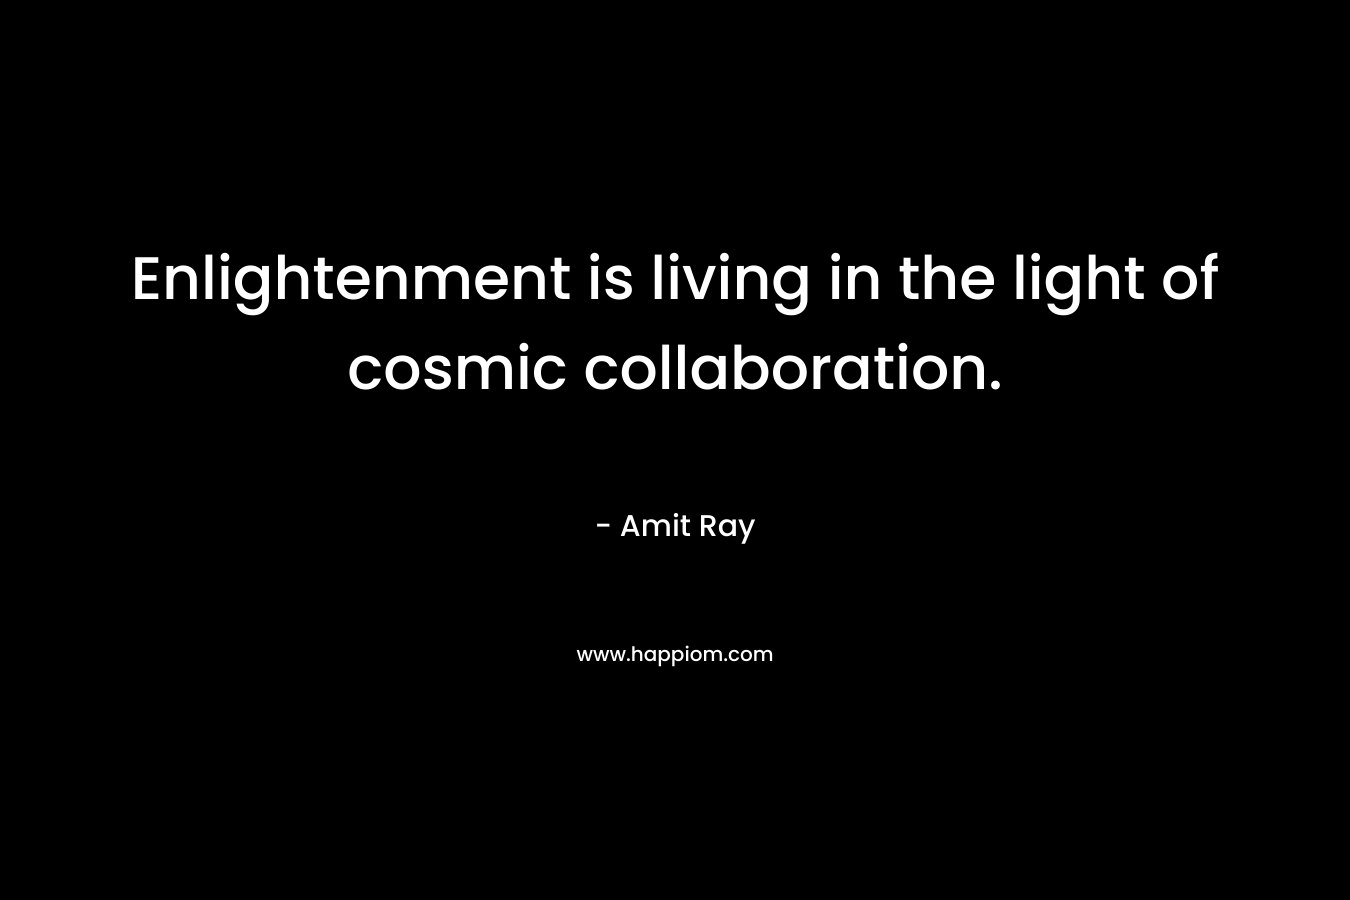 Enlightenment is living in the light of cosmic collaboration. – Amit Ray